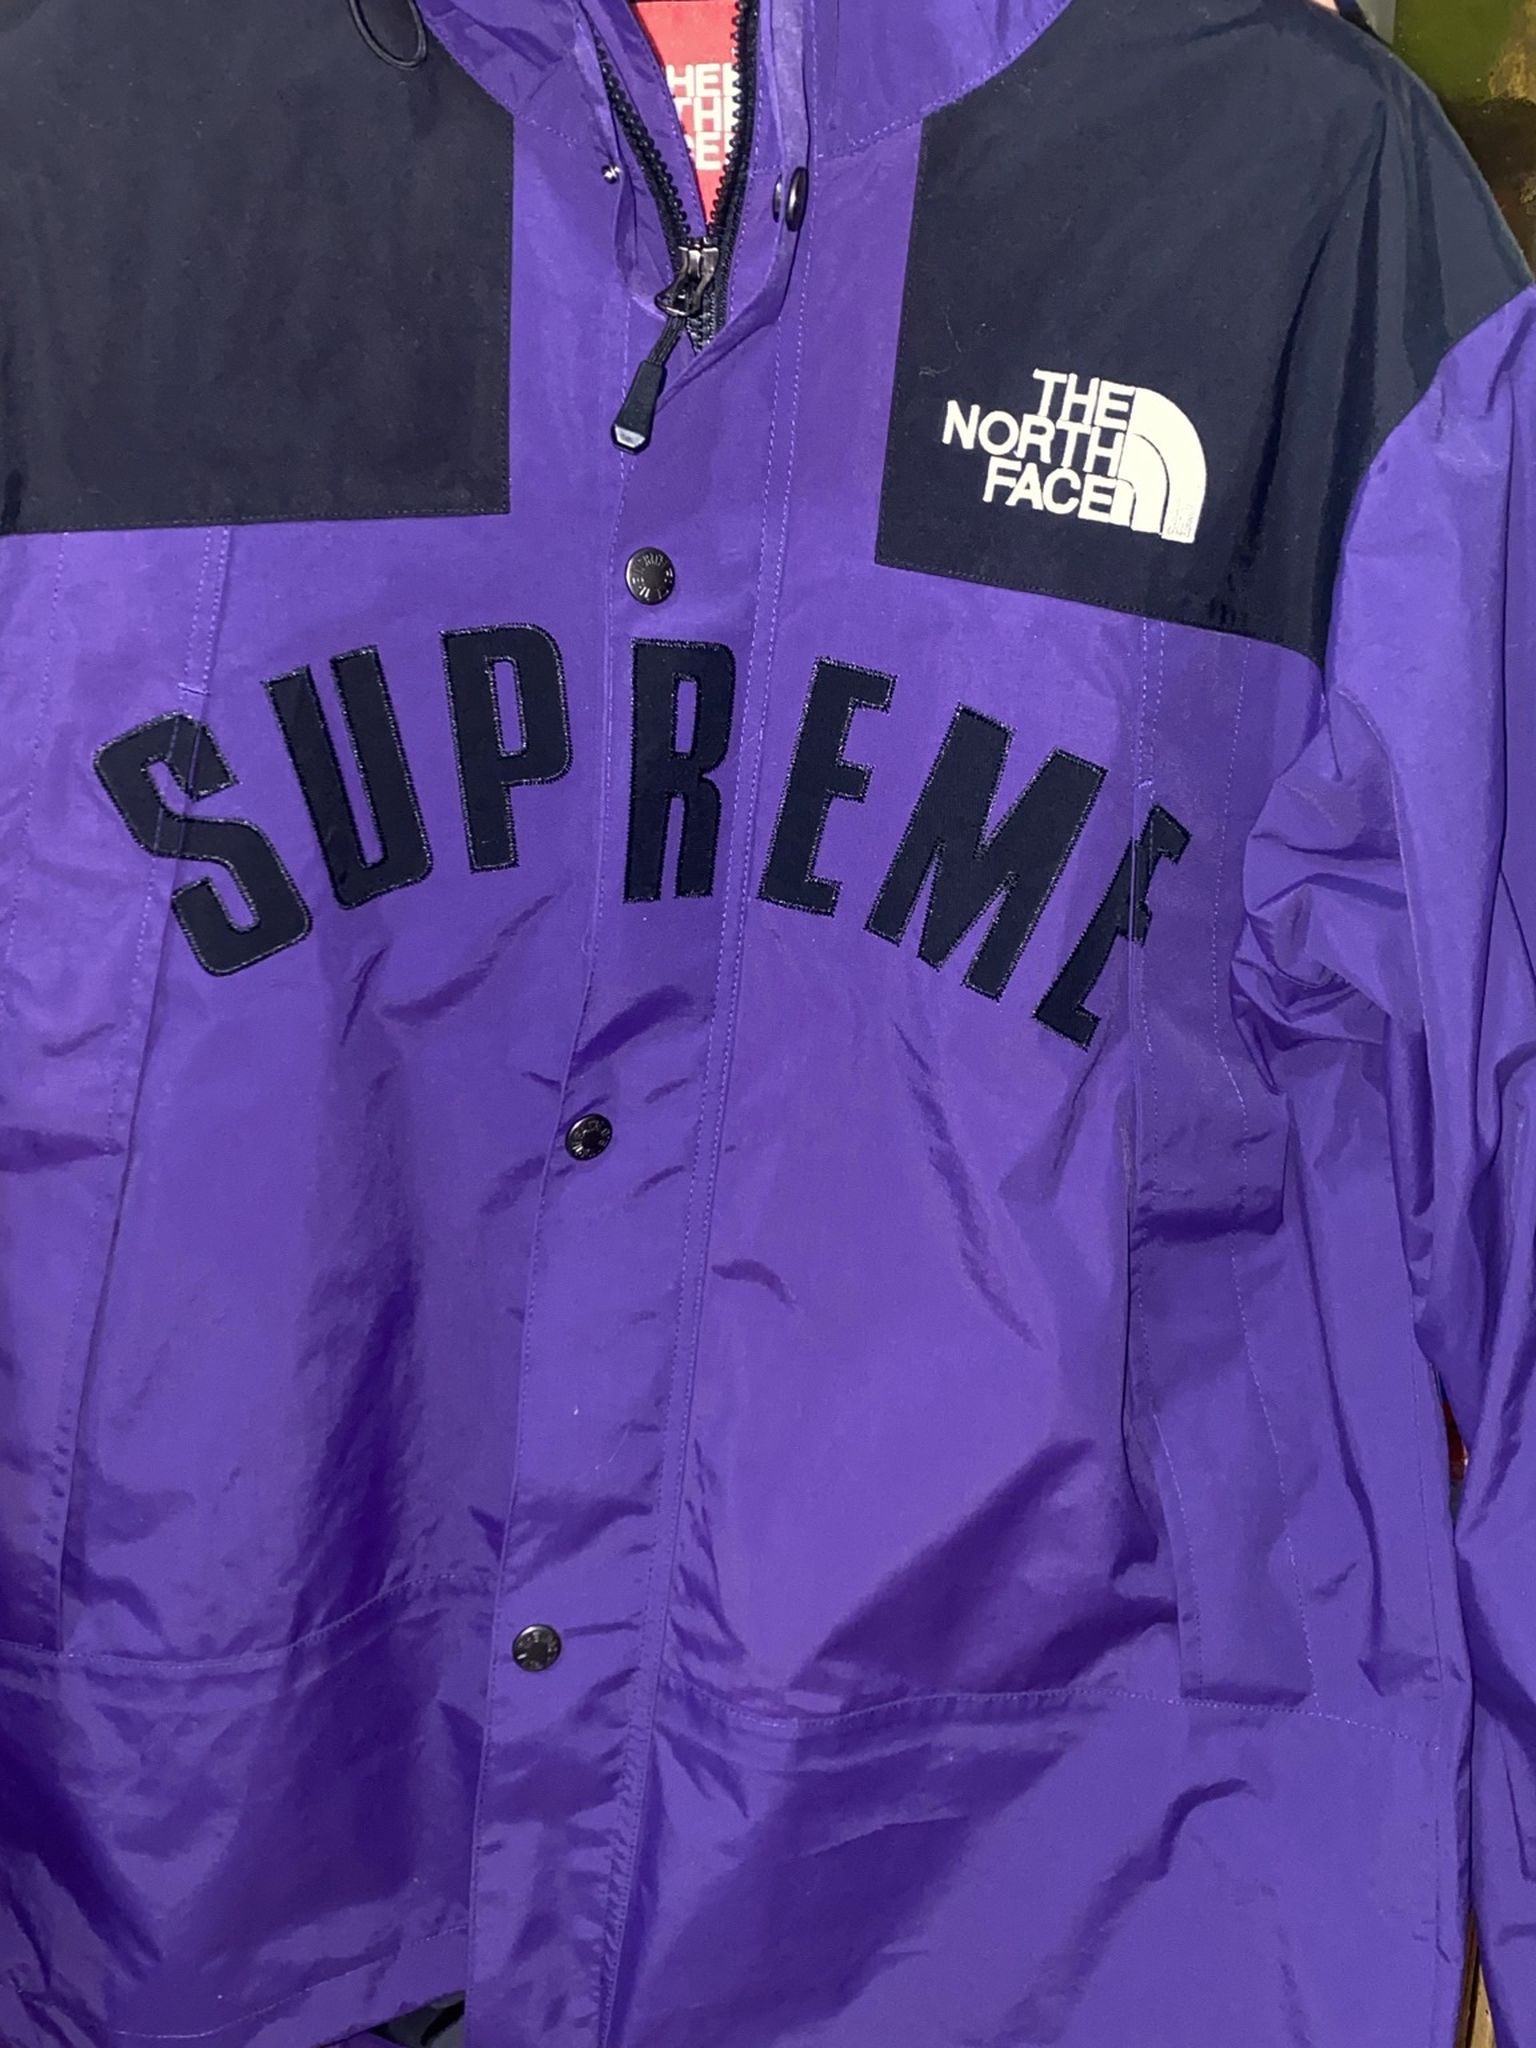 The North Face x Supreme Arc Logo Parka Hoodie Jacket Shell Purple Coat Men’s Large Not Black Red Yellow Blue